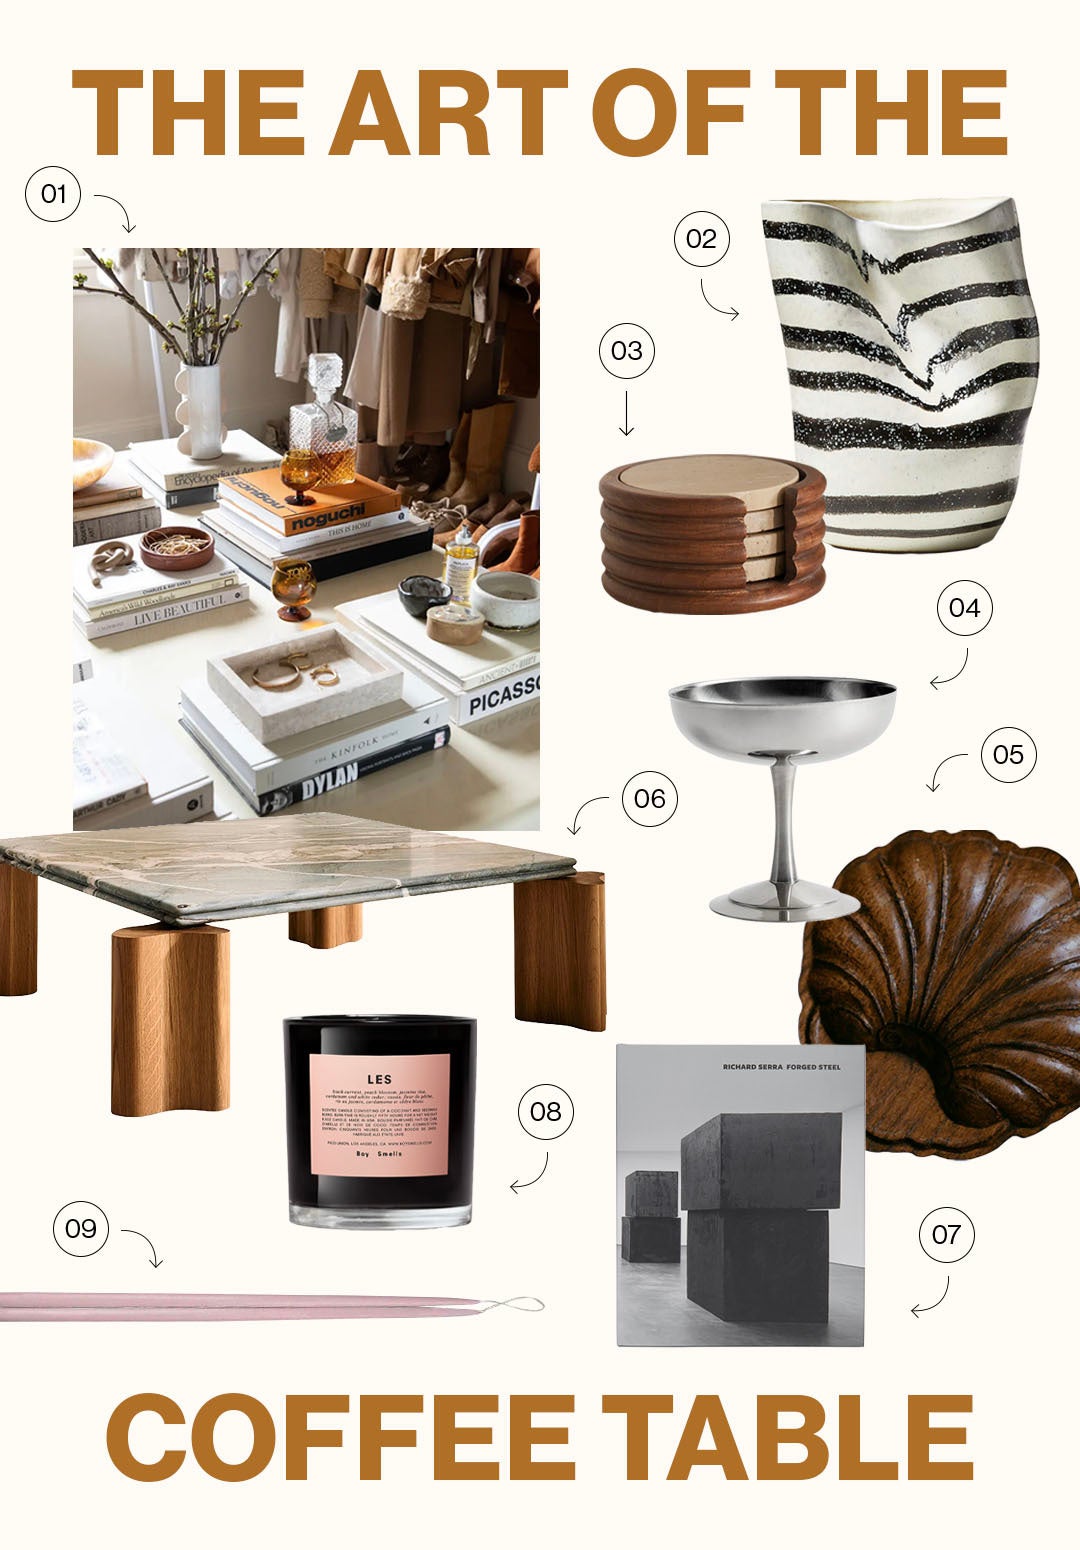 moodboard of coffee table accessories